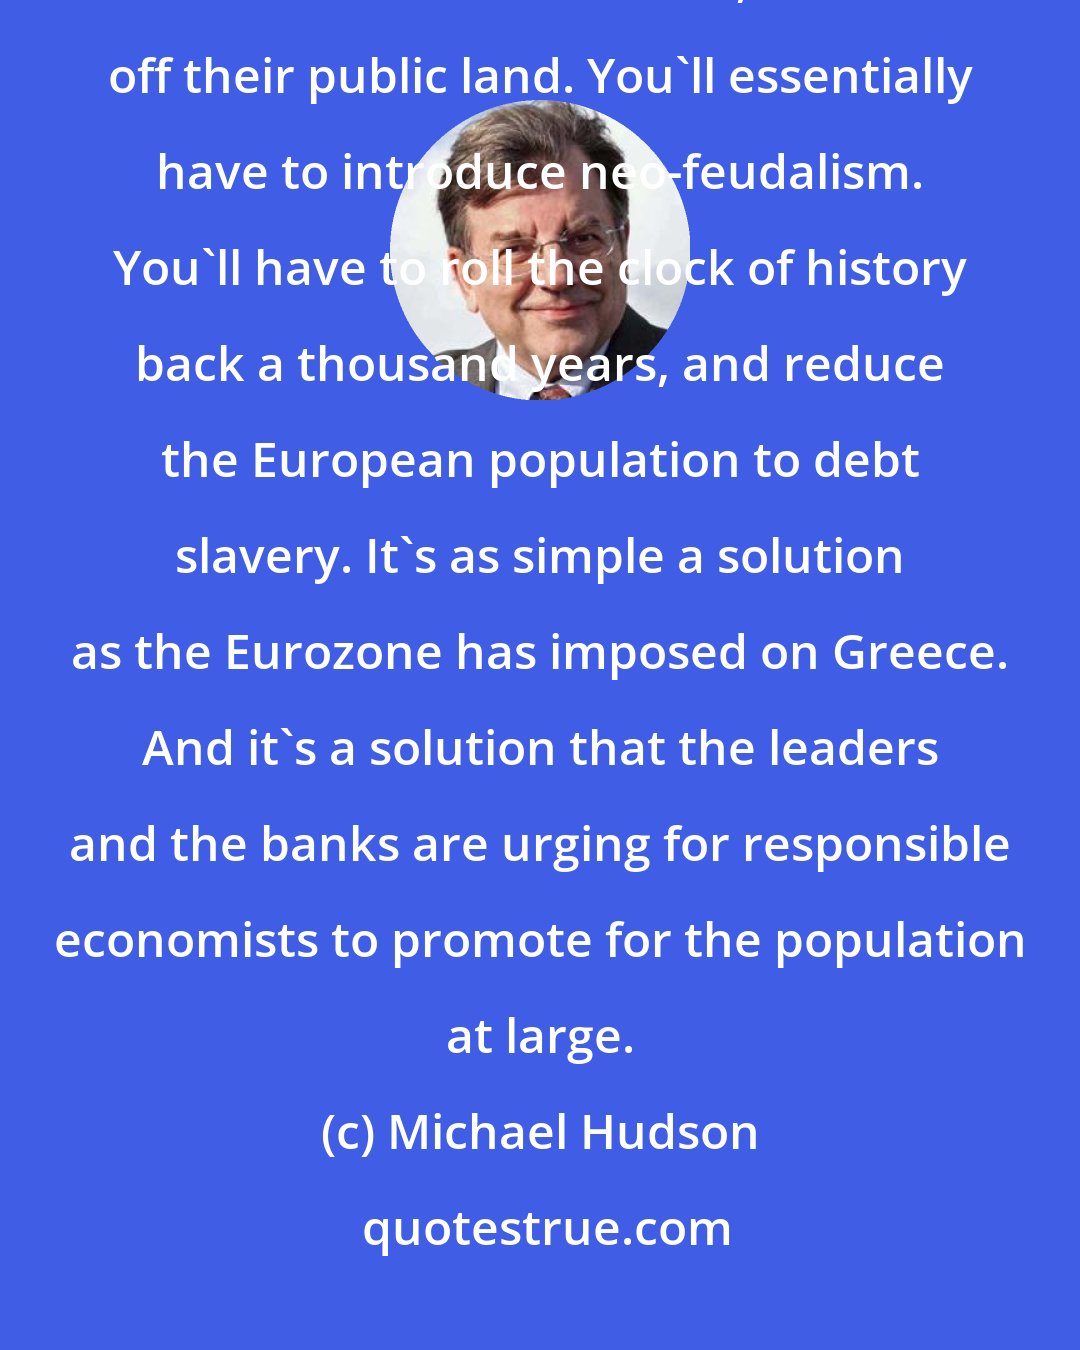 Michael Hudson: You'll have to have the governments sell off all of their public domains; sell off their railroads, sell off their public land. You'll essentially have to introduce neo-feudalism. You'll have to roll the clock of history back a thousand years, and reduce the European population to debt slavery. It's as simple a solution as the Eurozone has imposed on Greece. And it's a solution that the leaders and the banks are urging for responsible economists to promote for the population at large.